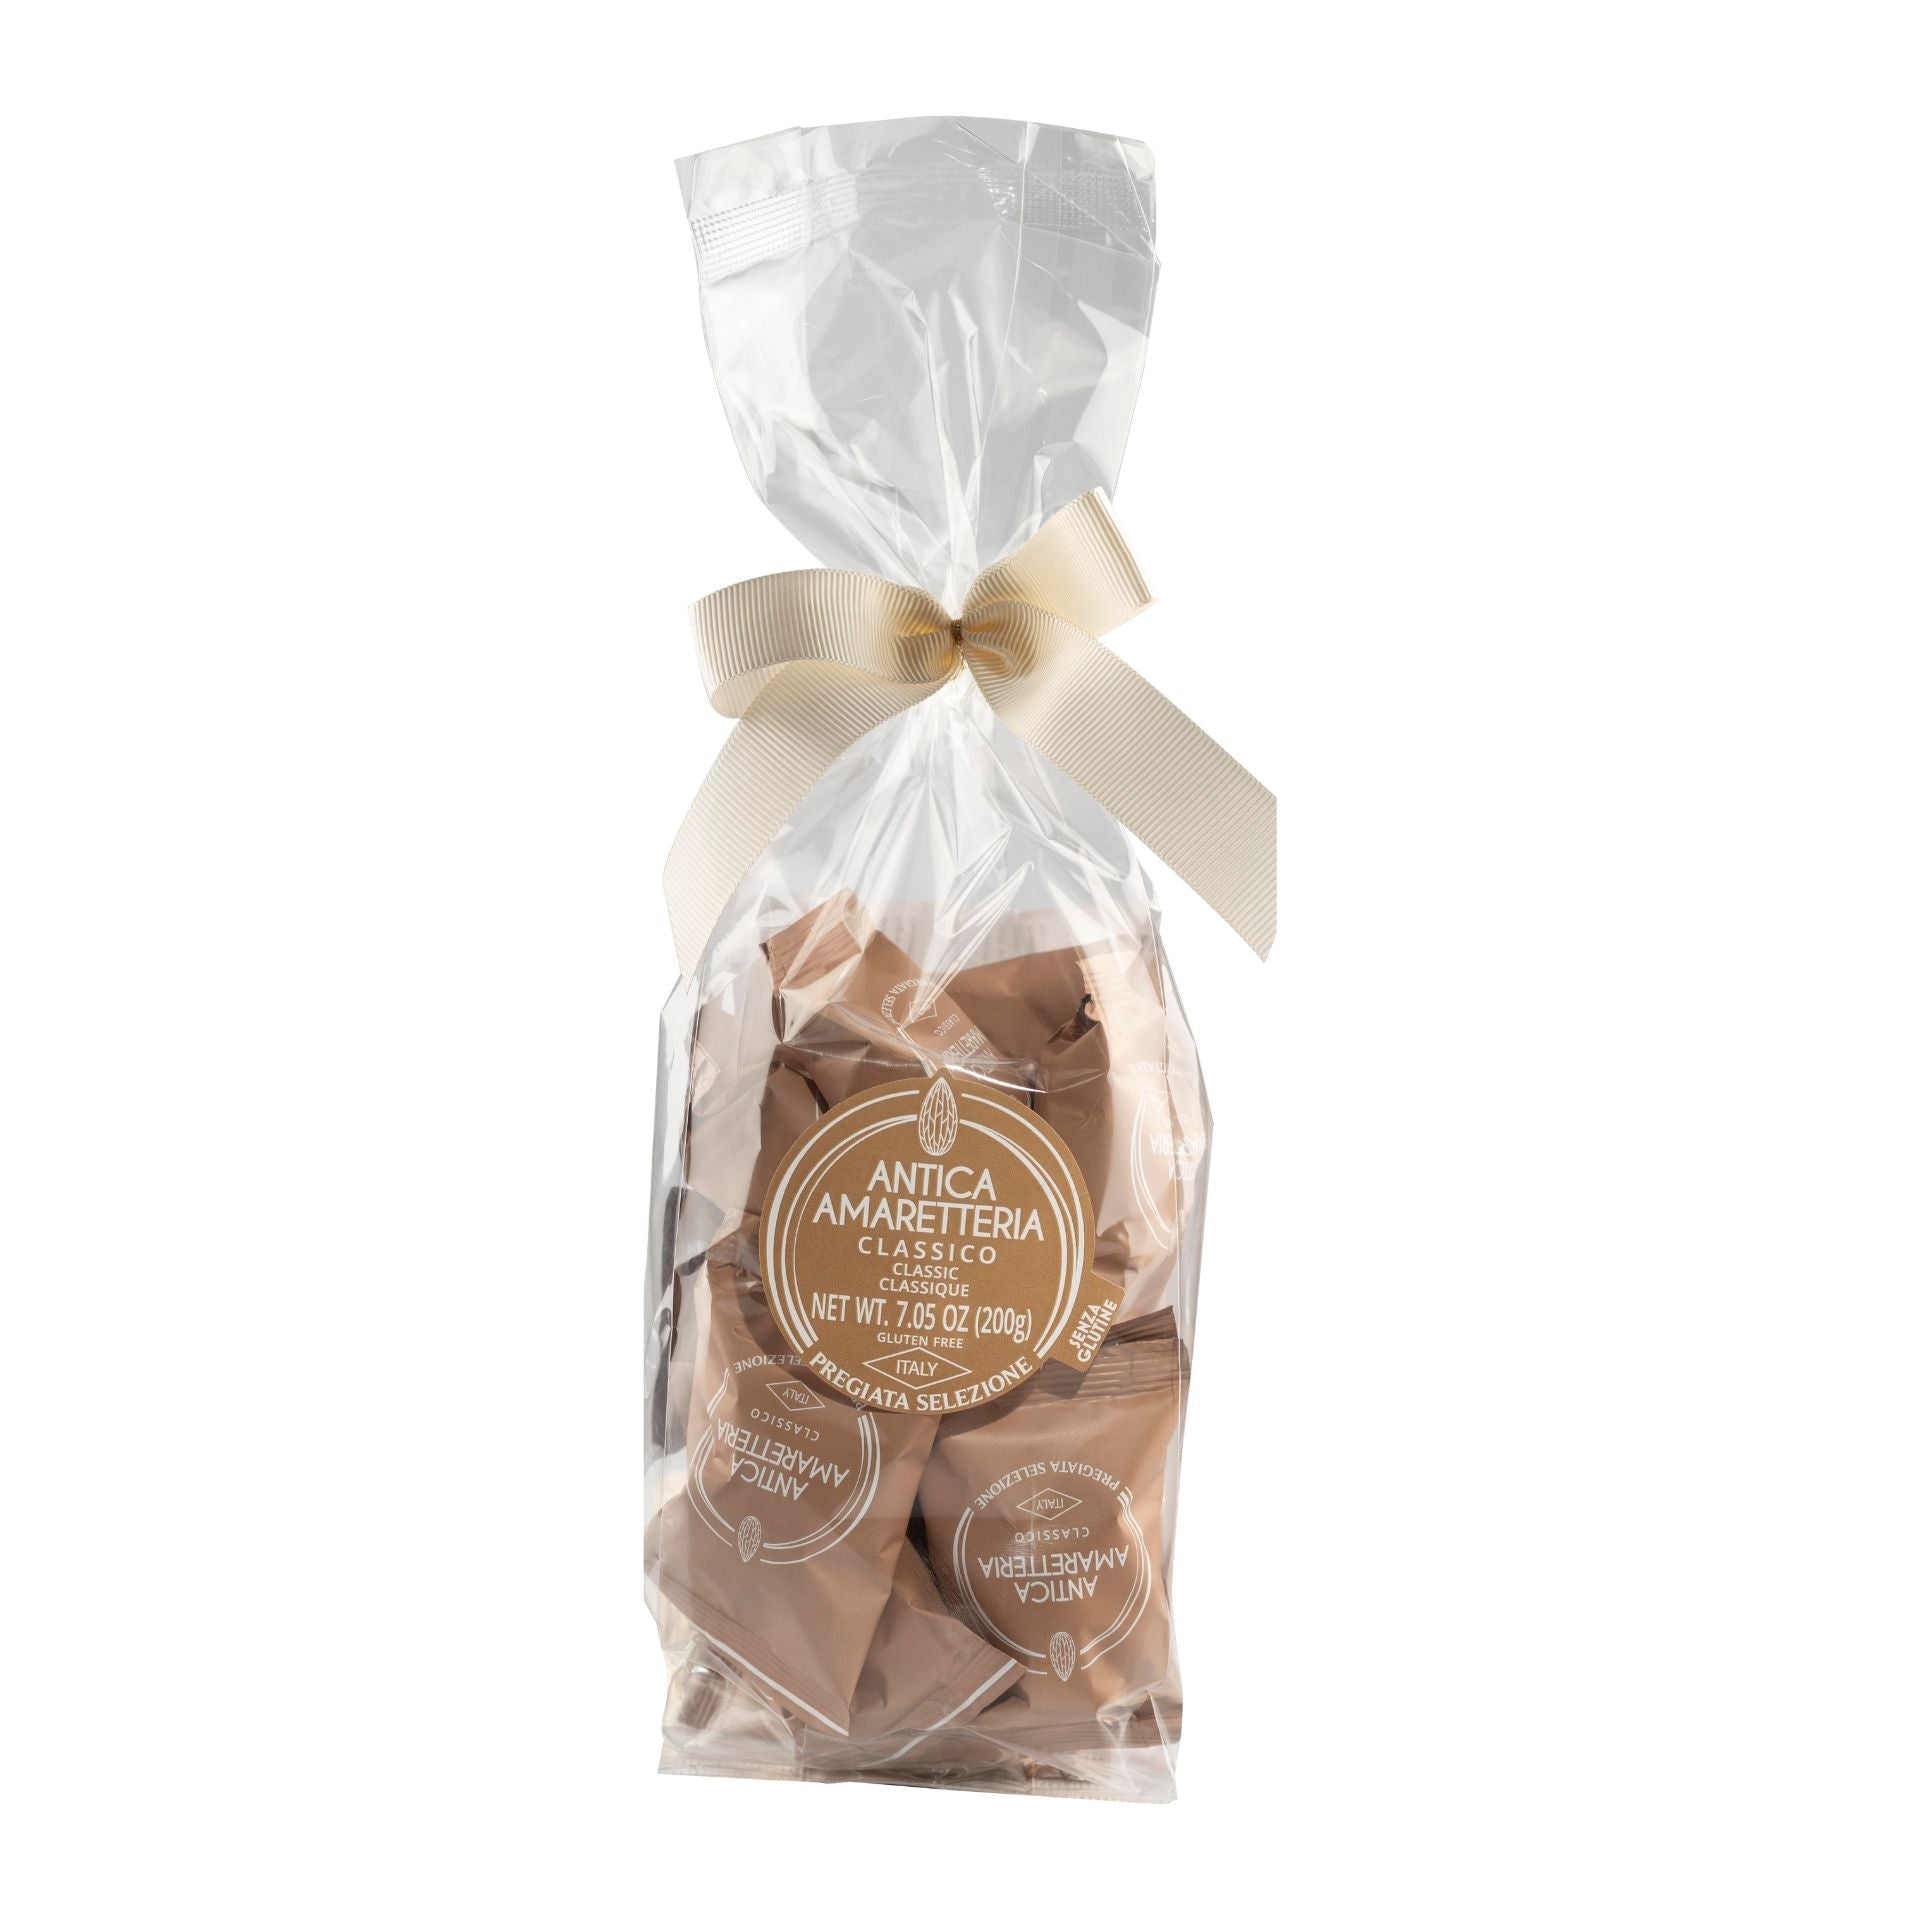 Antica Amaretteria Soft Classic Amaretti 200g (Bag)  | Imported and distributed in the UK by Just Gourmet Foods